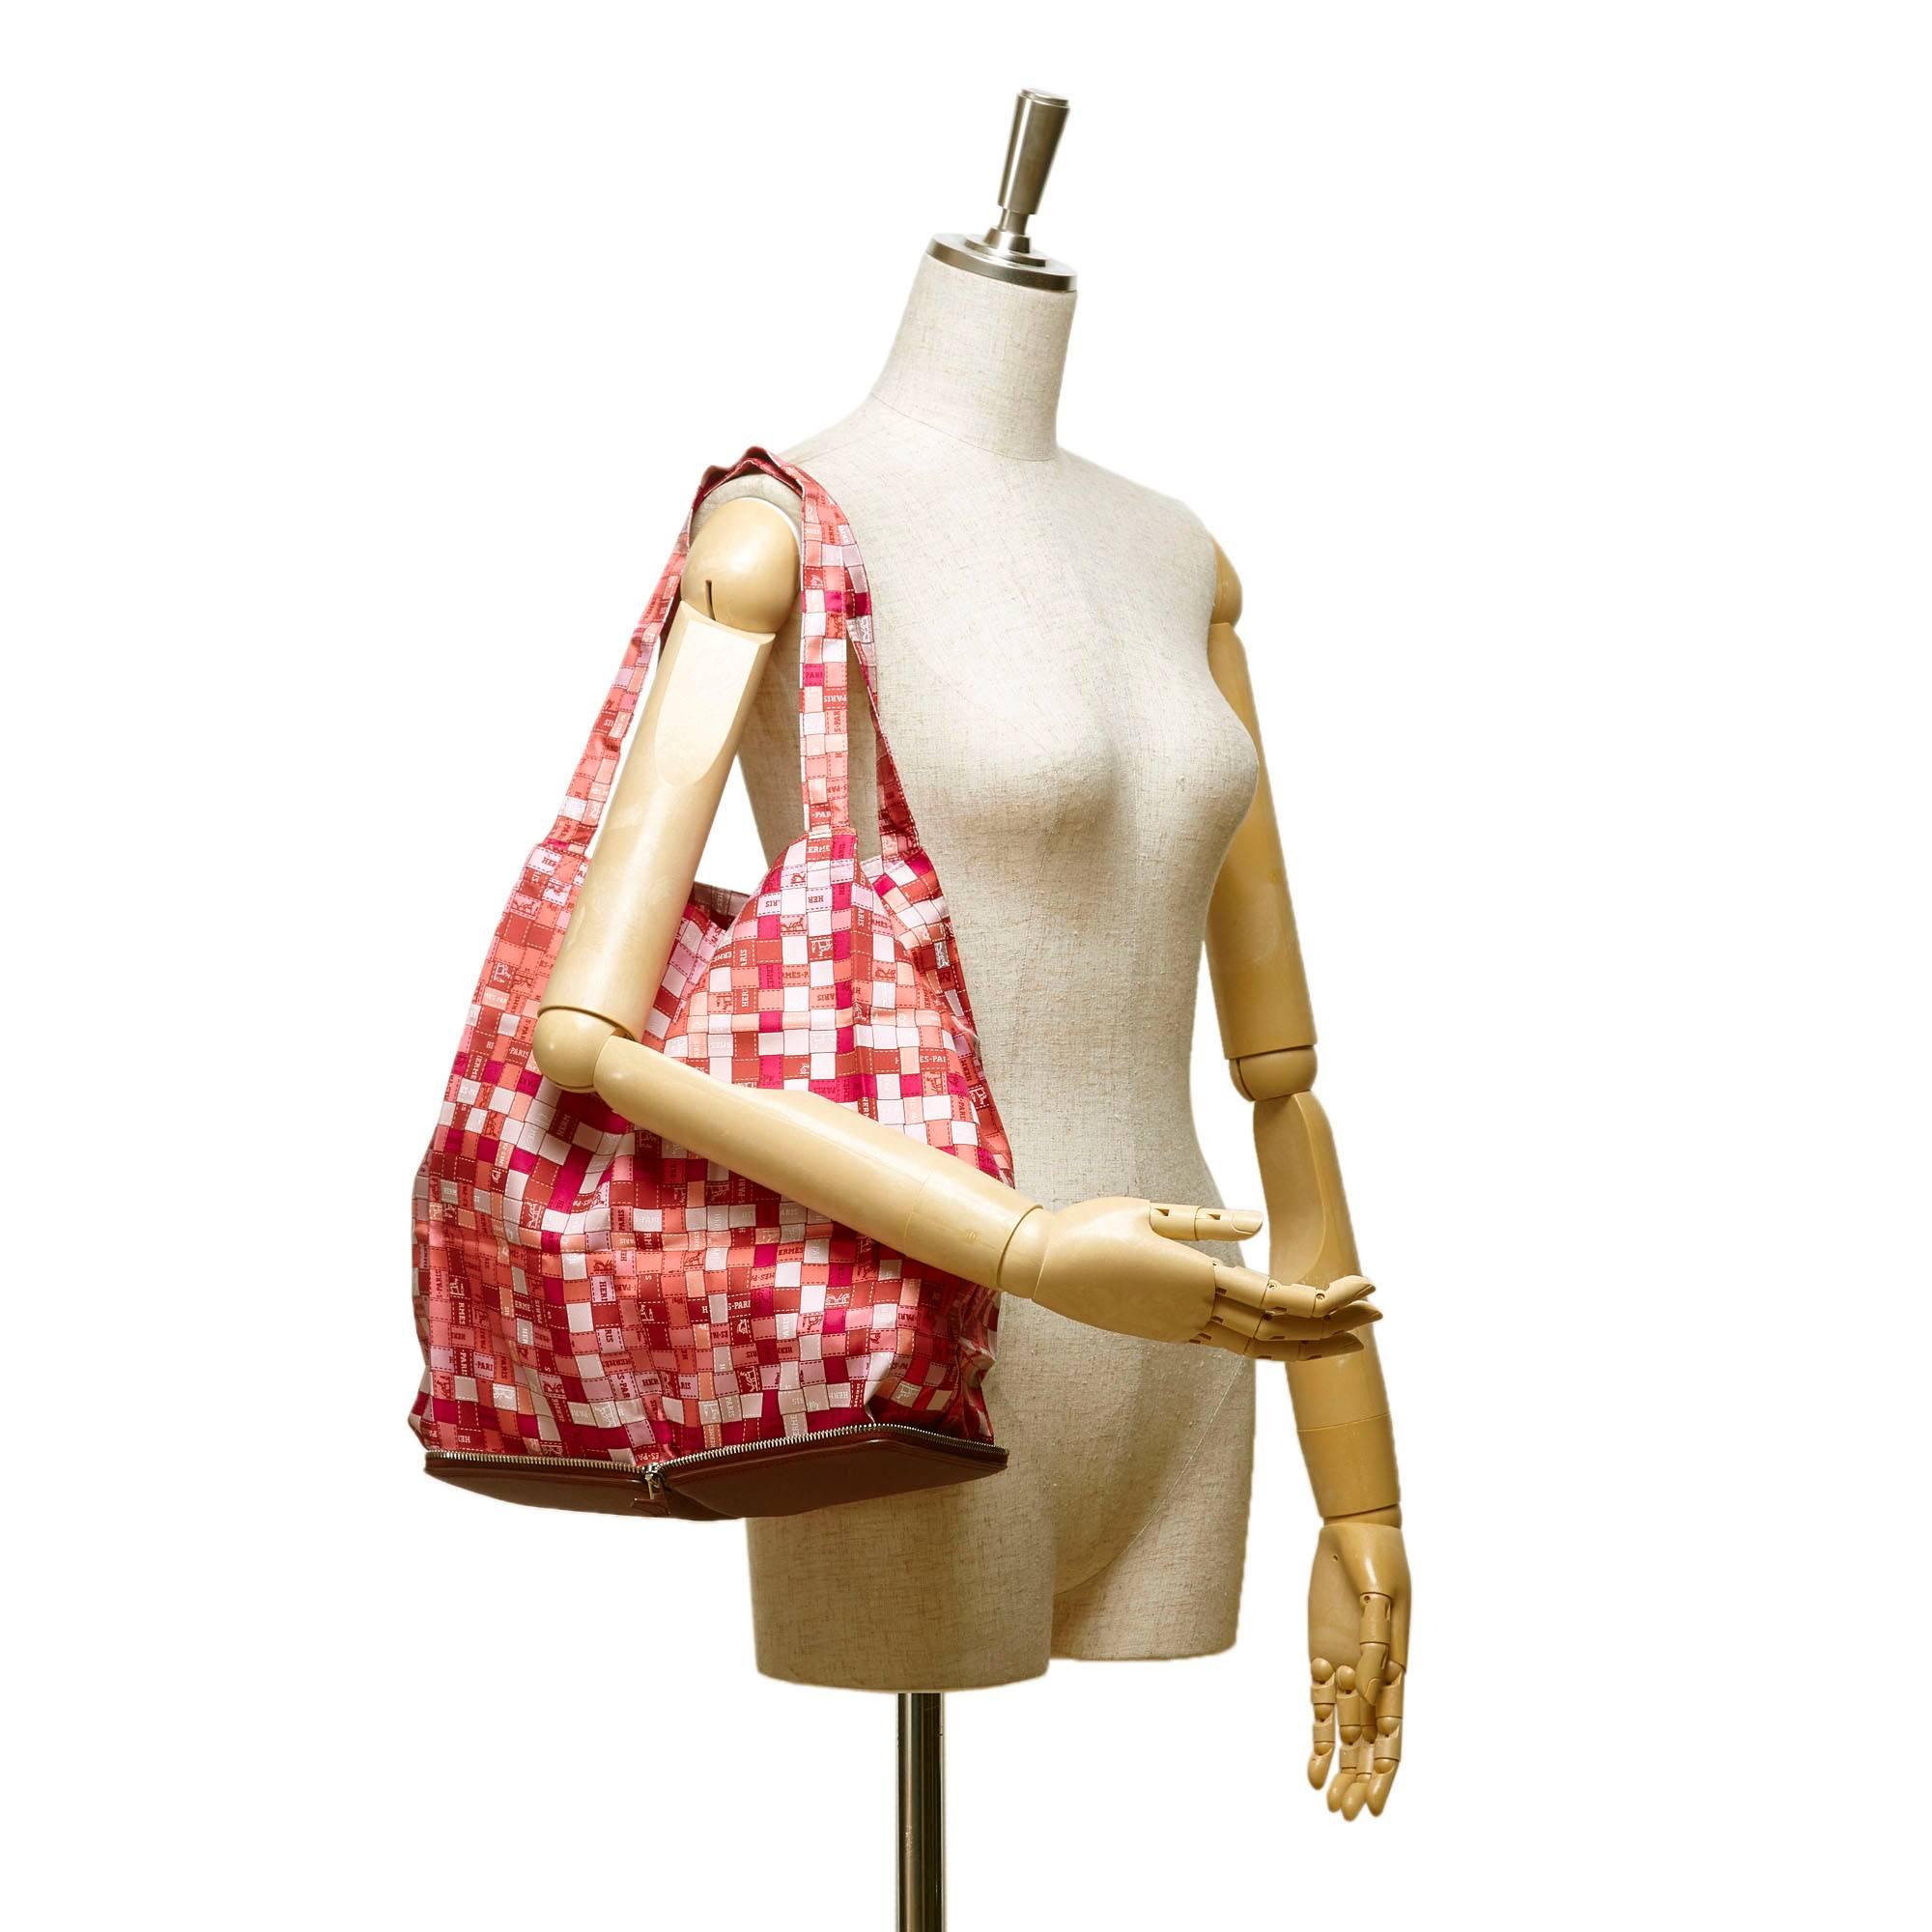 - These Hermes pink, red and white horse theme printed canvas silky top tote bag features a silk body, flat handle, open top, and a red leather casing with zip around closure. A luxury and chic bright colour shopping bag!

- Made in France. 

-